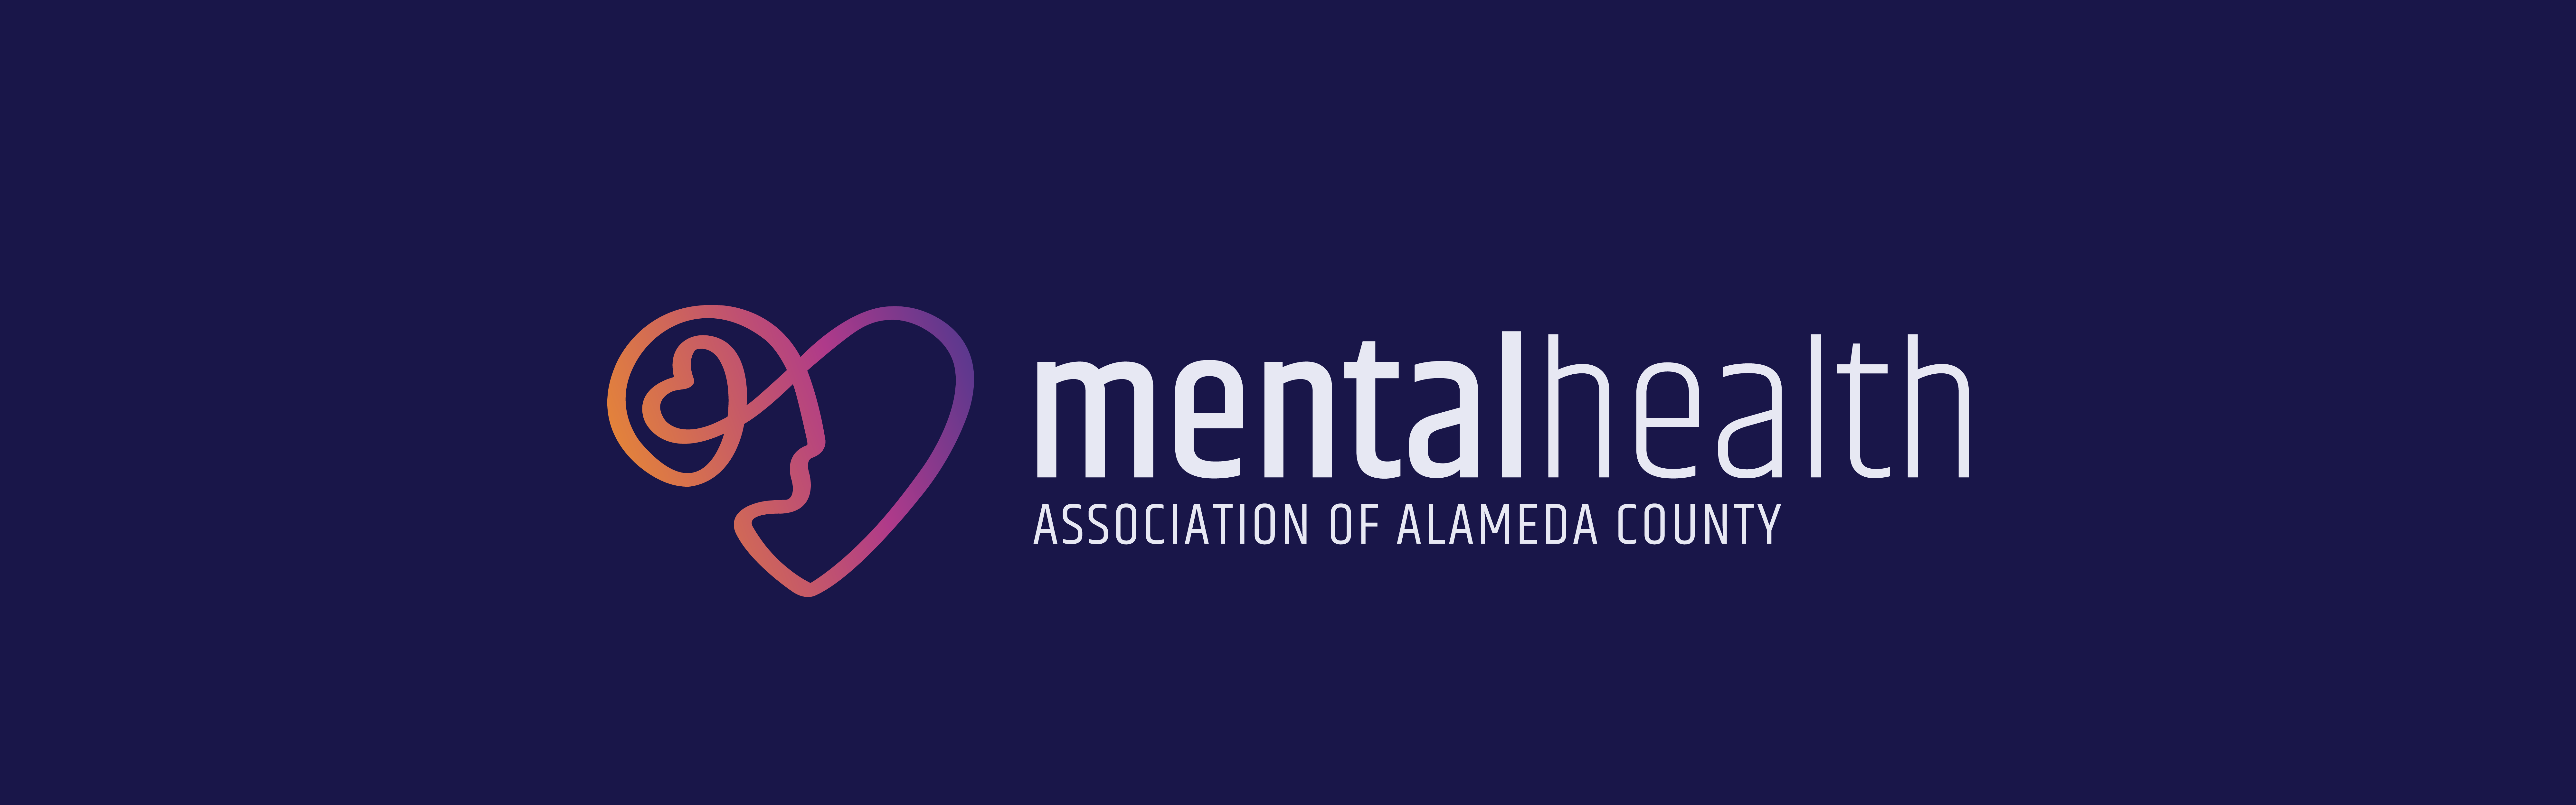 The image displays the logo of the Mental Health Association of Alameda County, featuring a heart and brain intertwined, next to the organization's name on a dark blue background.